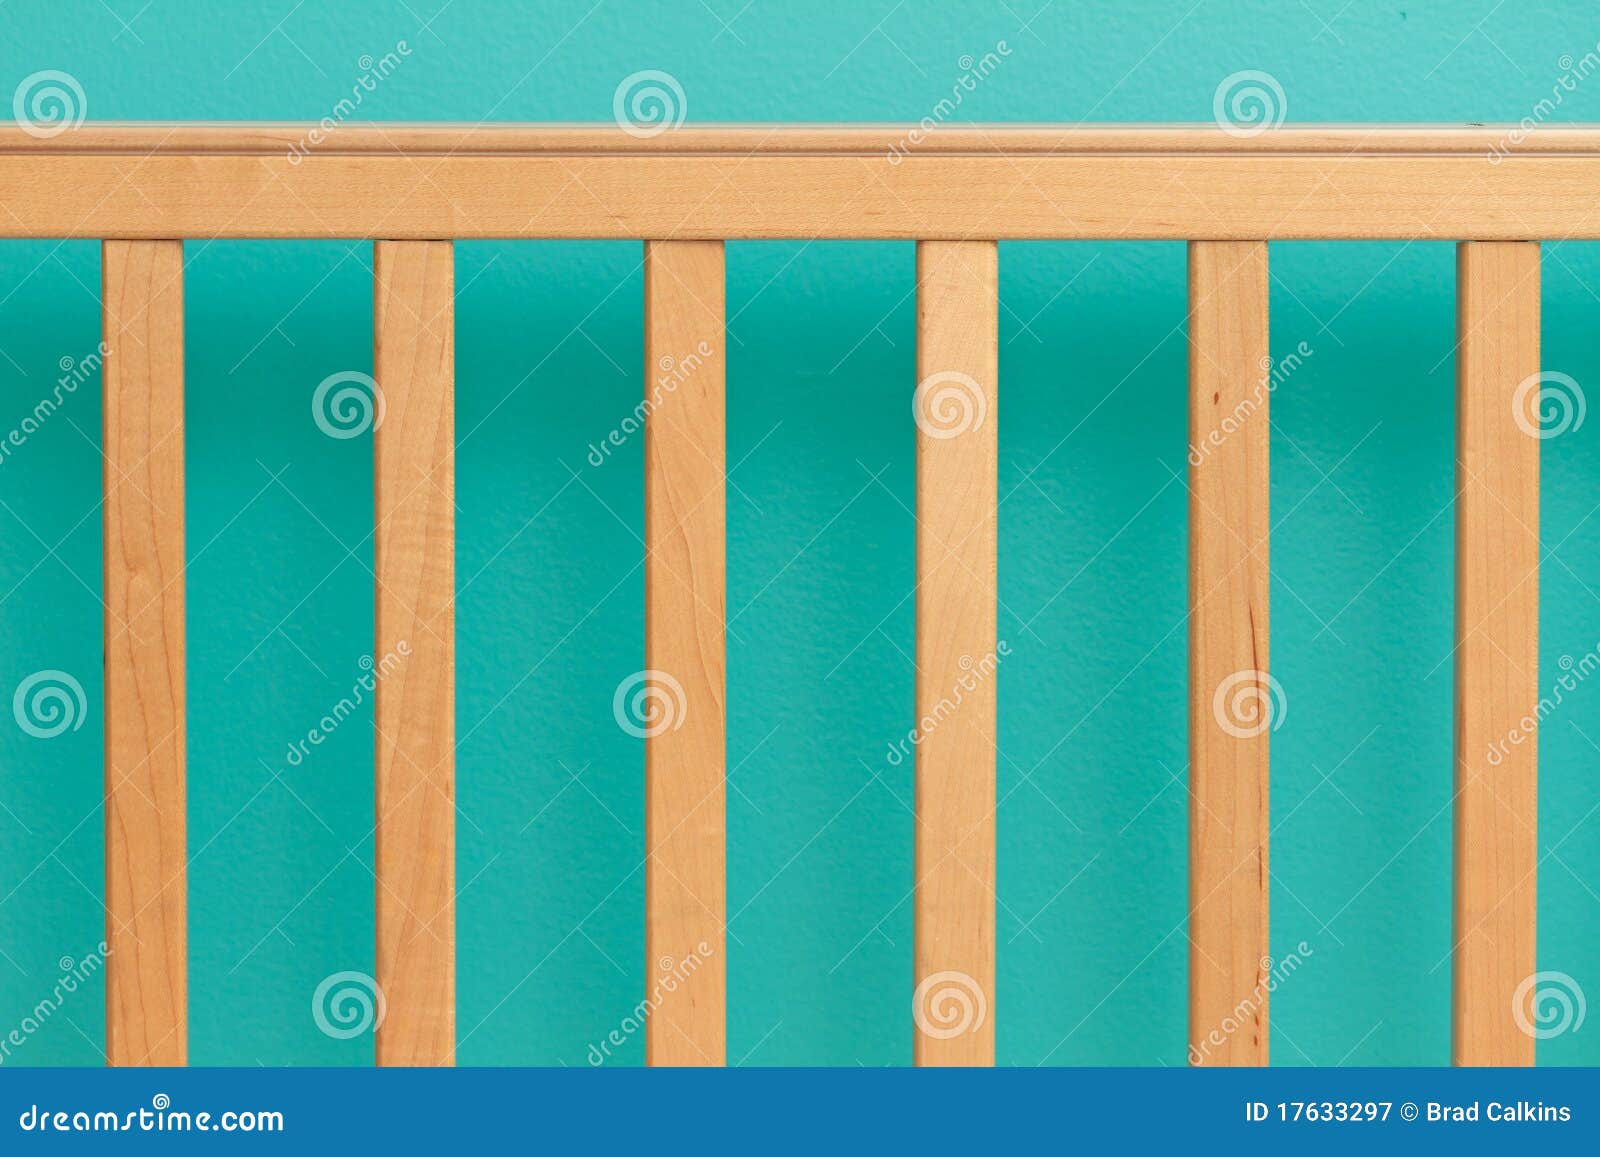 Side railing of baby's crib against turquoise wall.